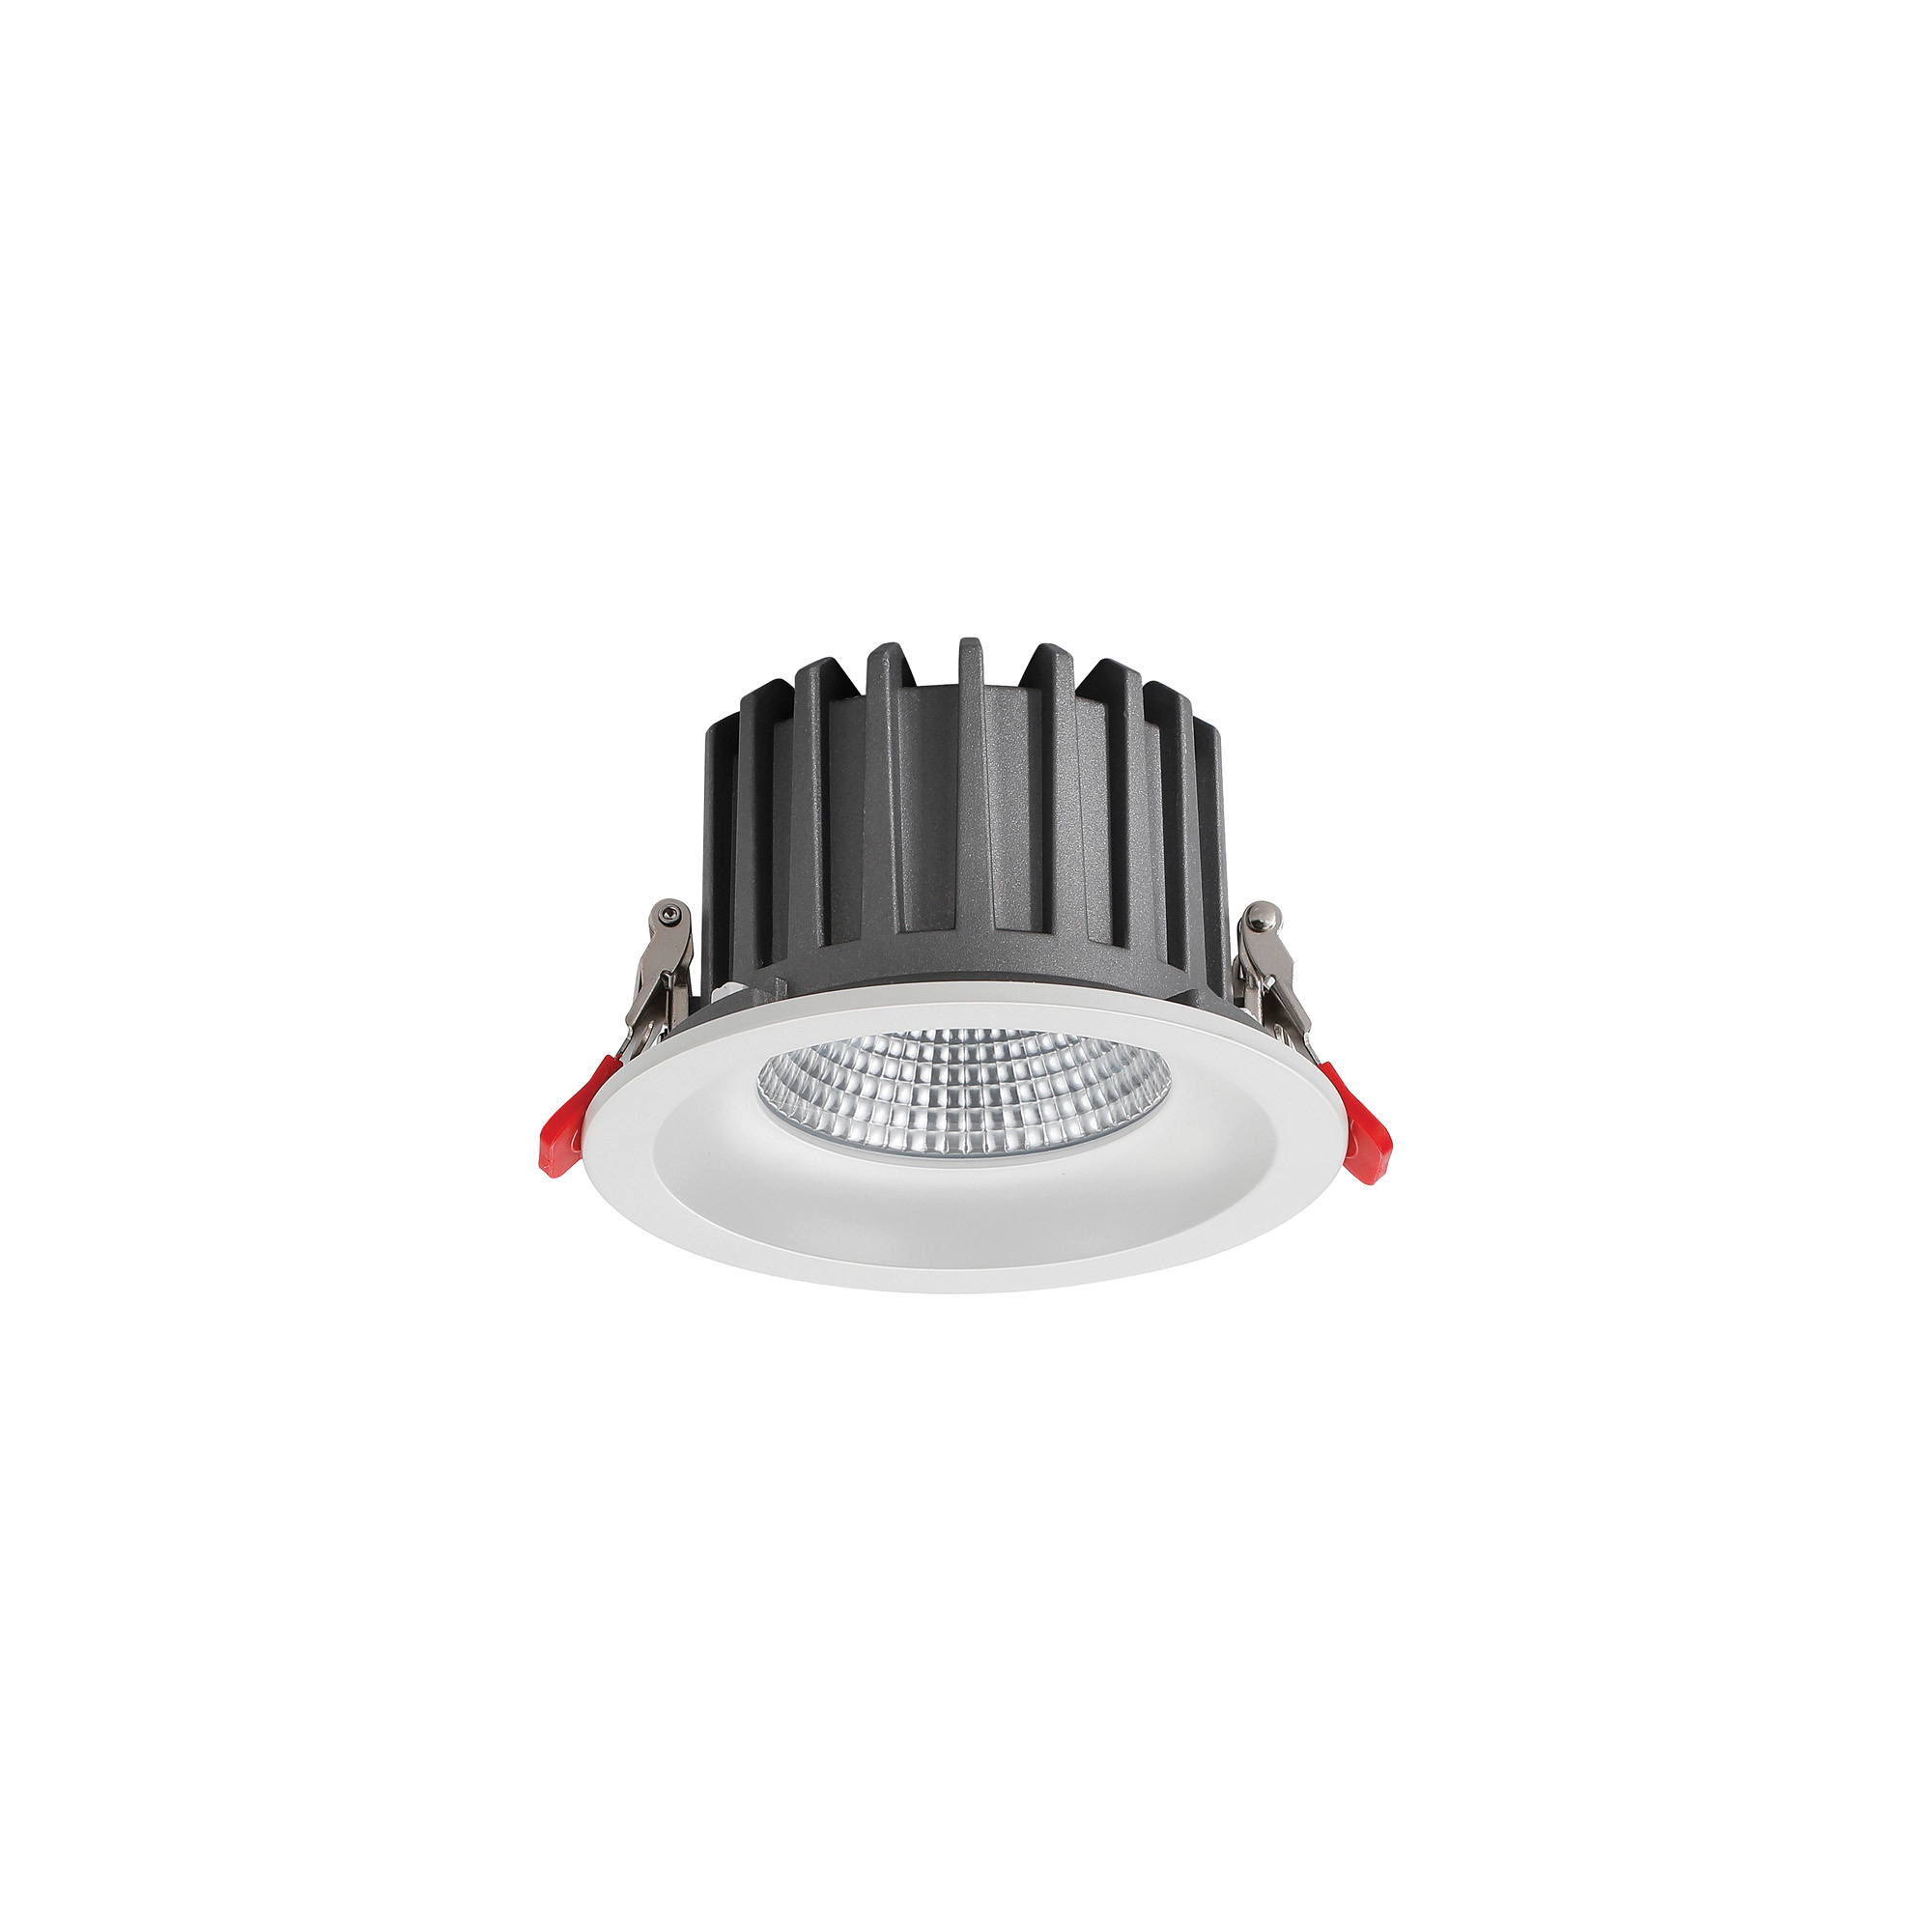 DL200055  Bionic 15; 15W; 350mA; White Deep Round Recessed Downlight; 1104lm ;Cut Out 120mm; 40° ; 3000K; IP44; DRIVER INC.; 5yrs Warranty.